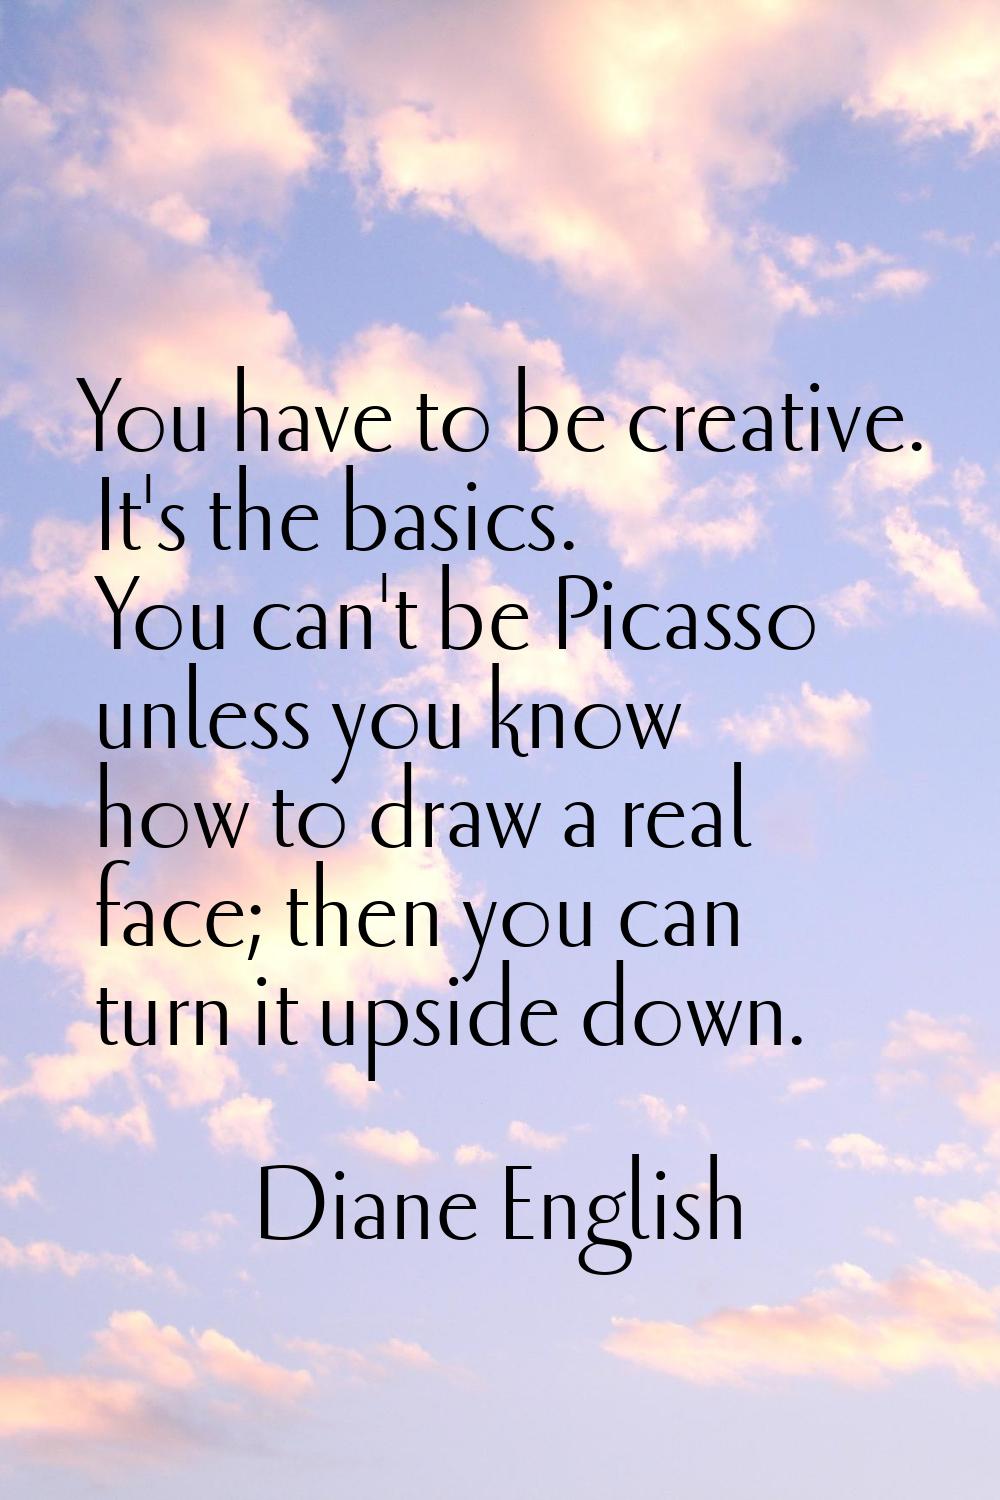 You have to be creative. It's the basics. You can't be Picasso unless you know how to draw a real f